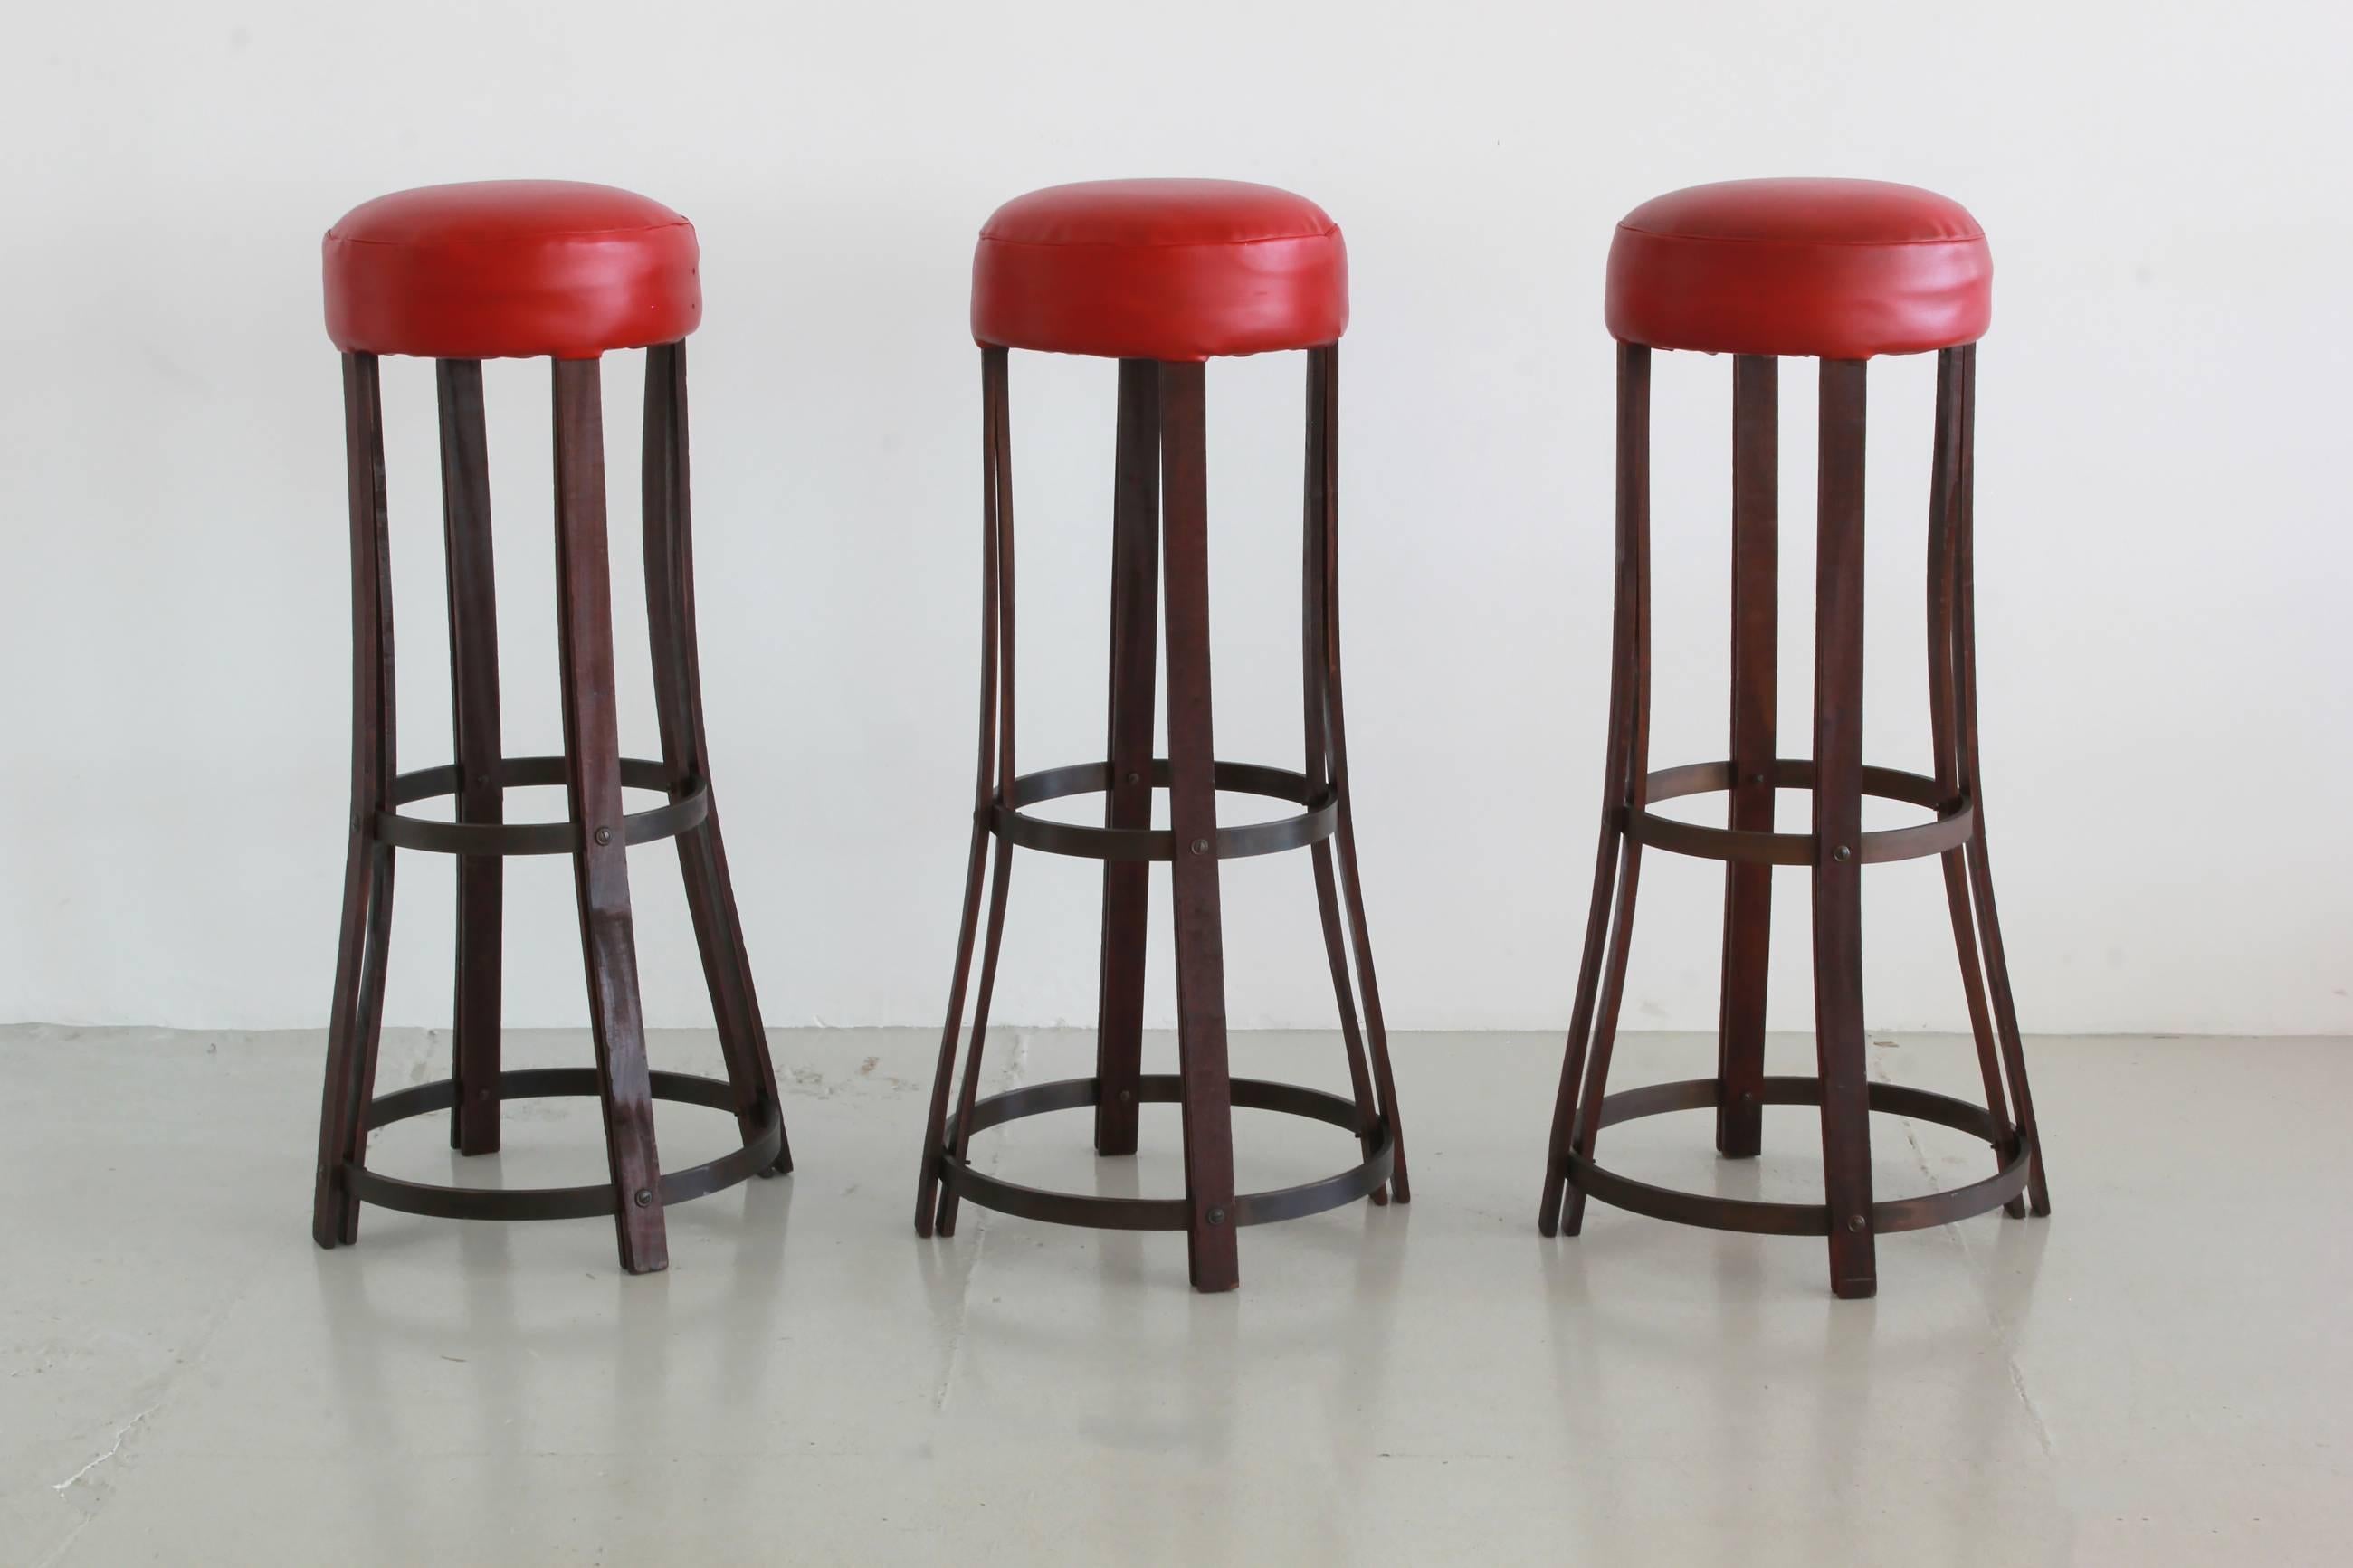 Great set of three Italian barstools with curved legs and original leather upholstered seat.
Great simple lines.